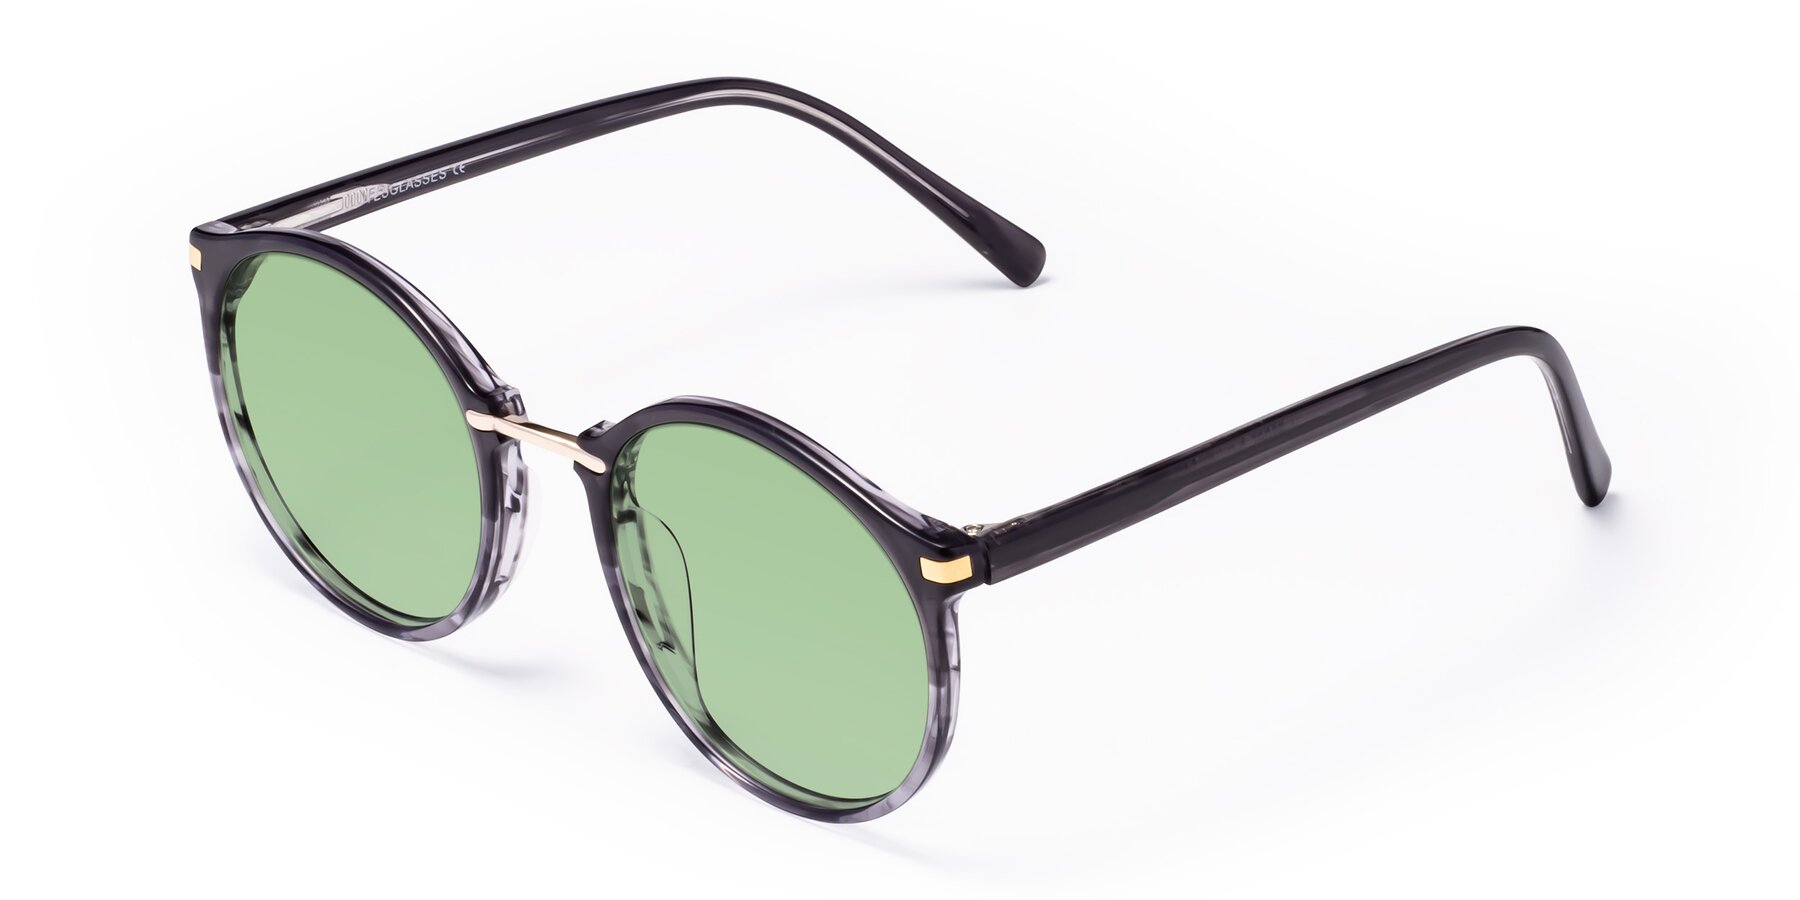 Angle of Casper in Translucent Black with Medium Green Tinted Lenses